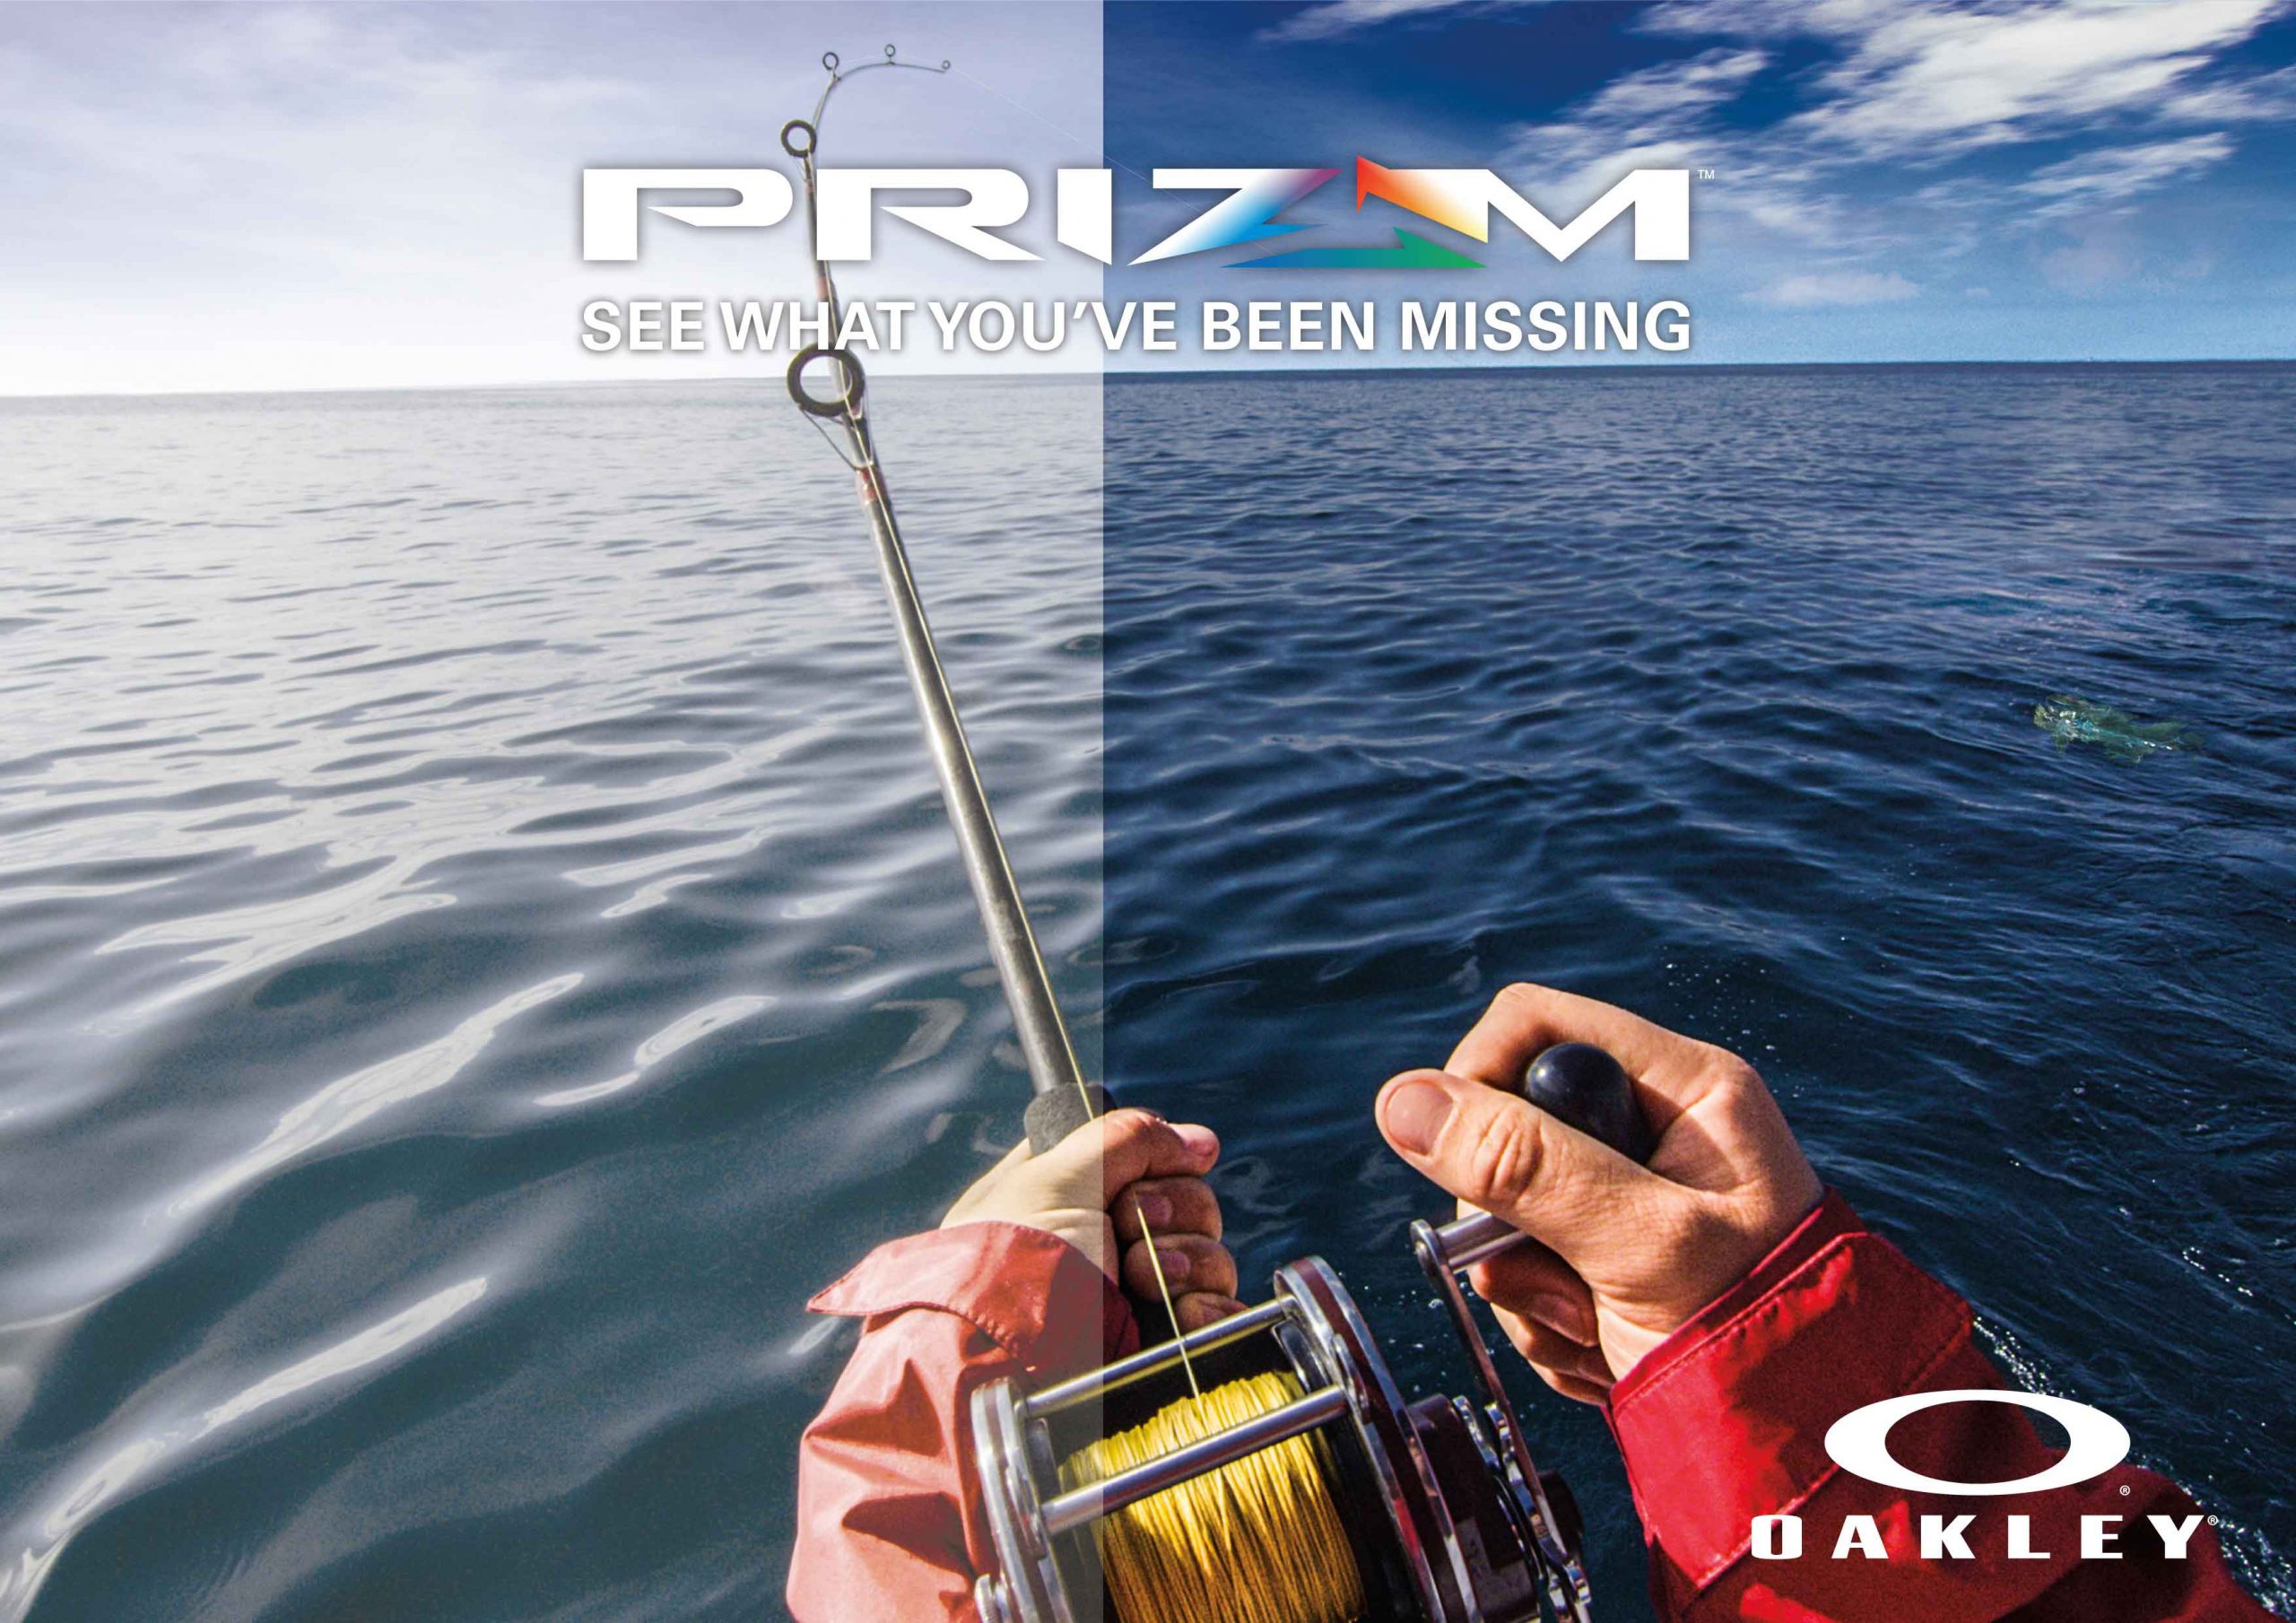 fisherman's view of water with oakley prizm lens technology and without it that show polarized sunglasses help you see fish